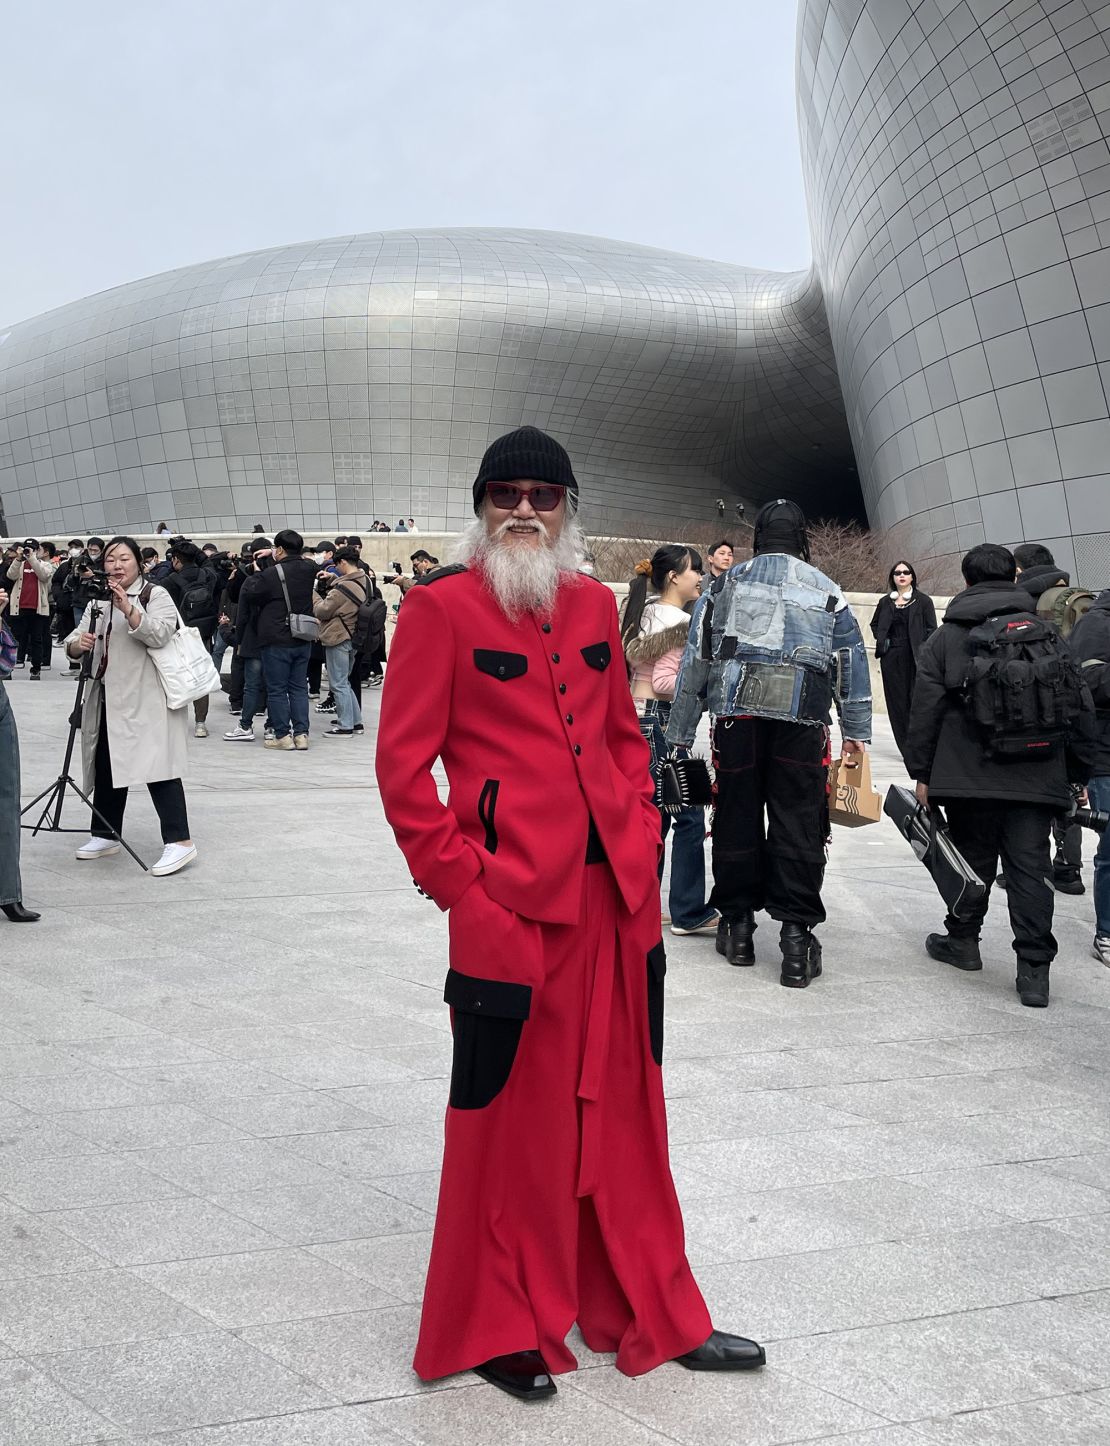 "I think fashion is a very important means of expression," said 70-year-old Lee Sang-hong. "People cannot change their natural appearances, but we can change our outlook through different styles."